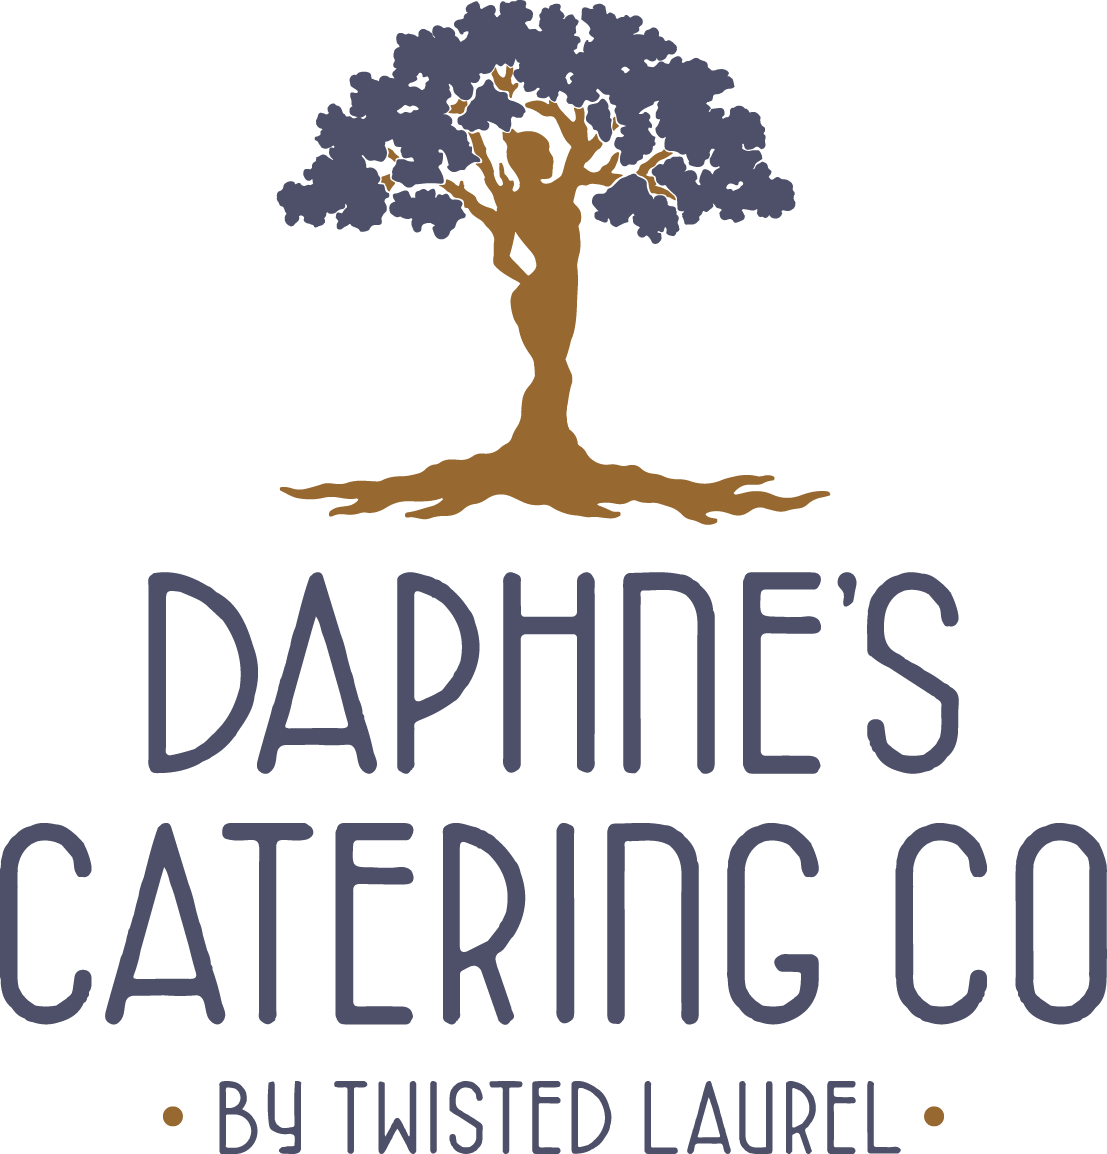 Daphne's Catering Co. by Twisted Laurel